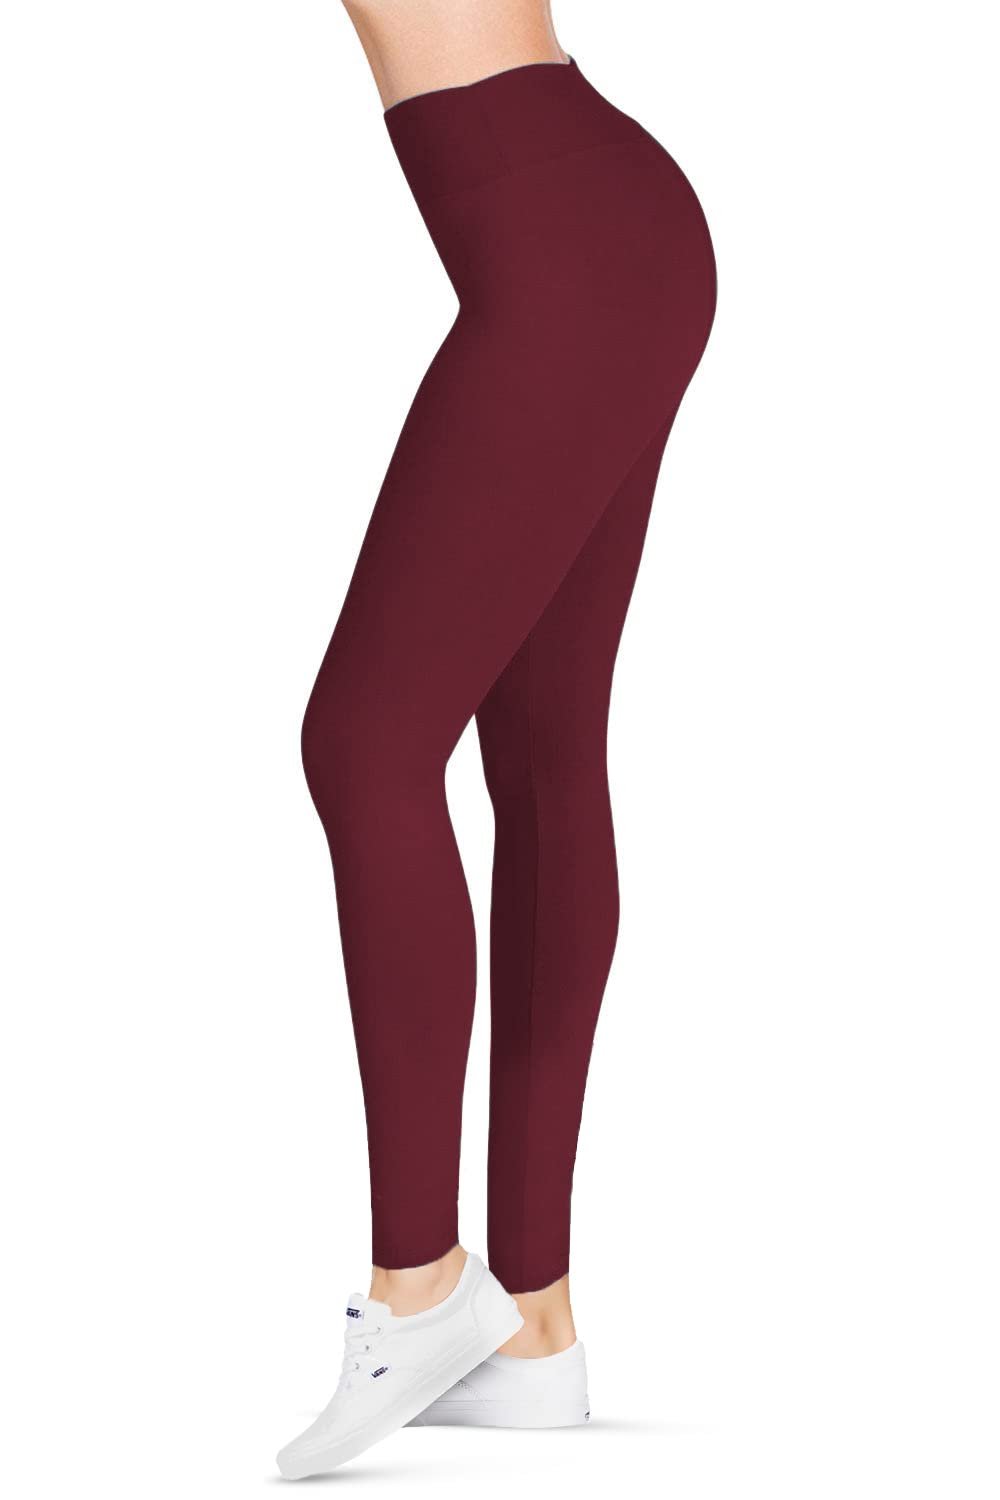 SATINA Burgundy High Waisted Leggings for Women | 3 Inch Waistband | Regular & Plus Size Available | Free Shipping & Returns